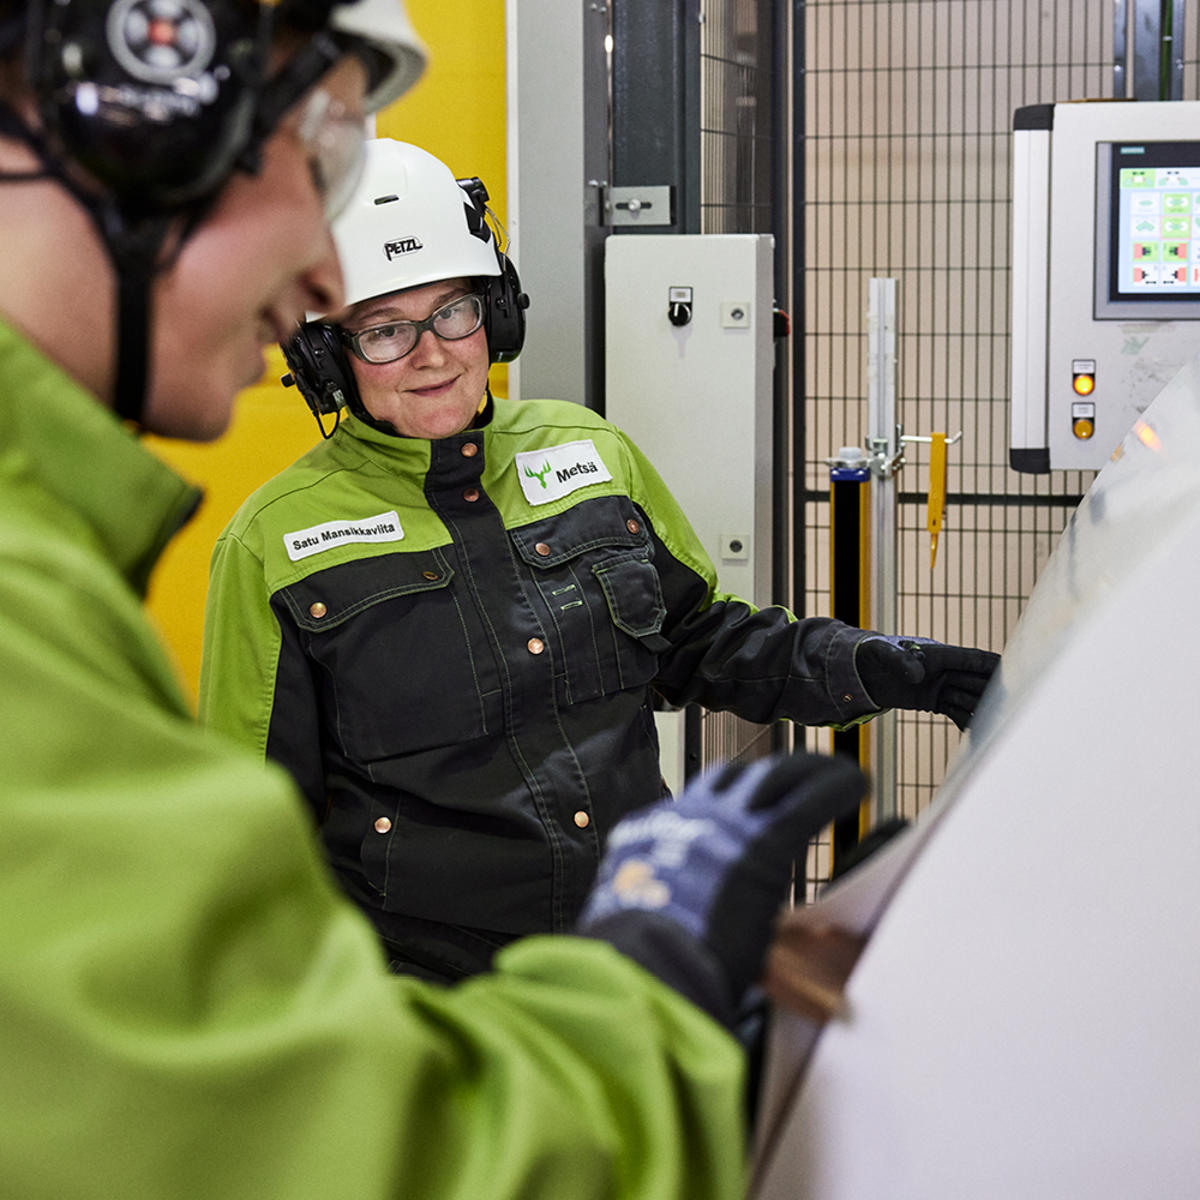 Promoting safety and well-being: Zero accidents, and boost job satisfaction.